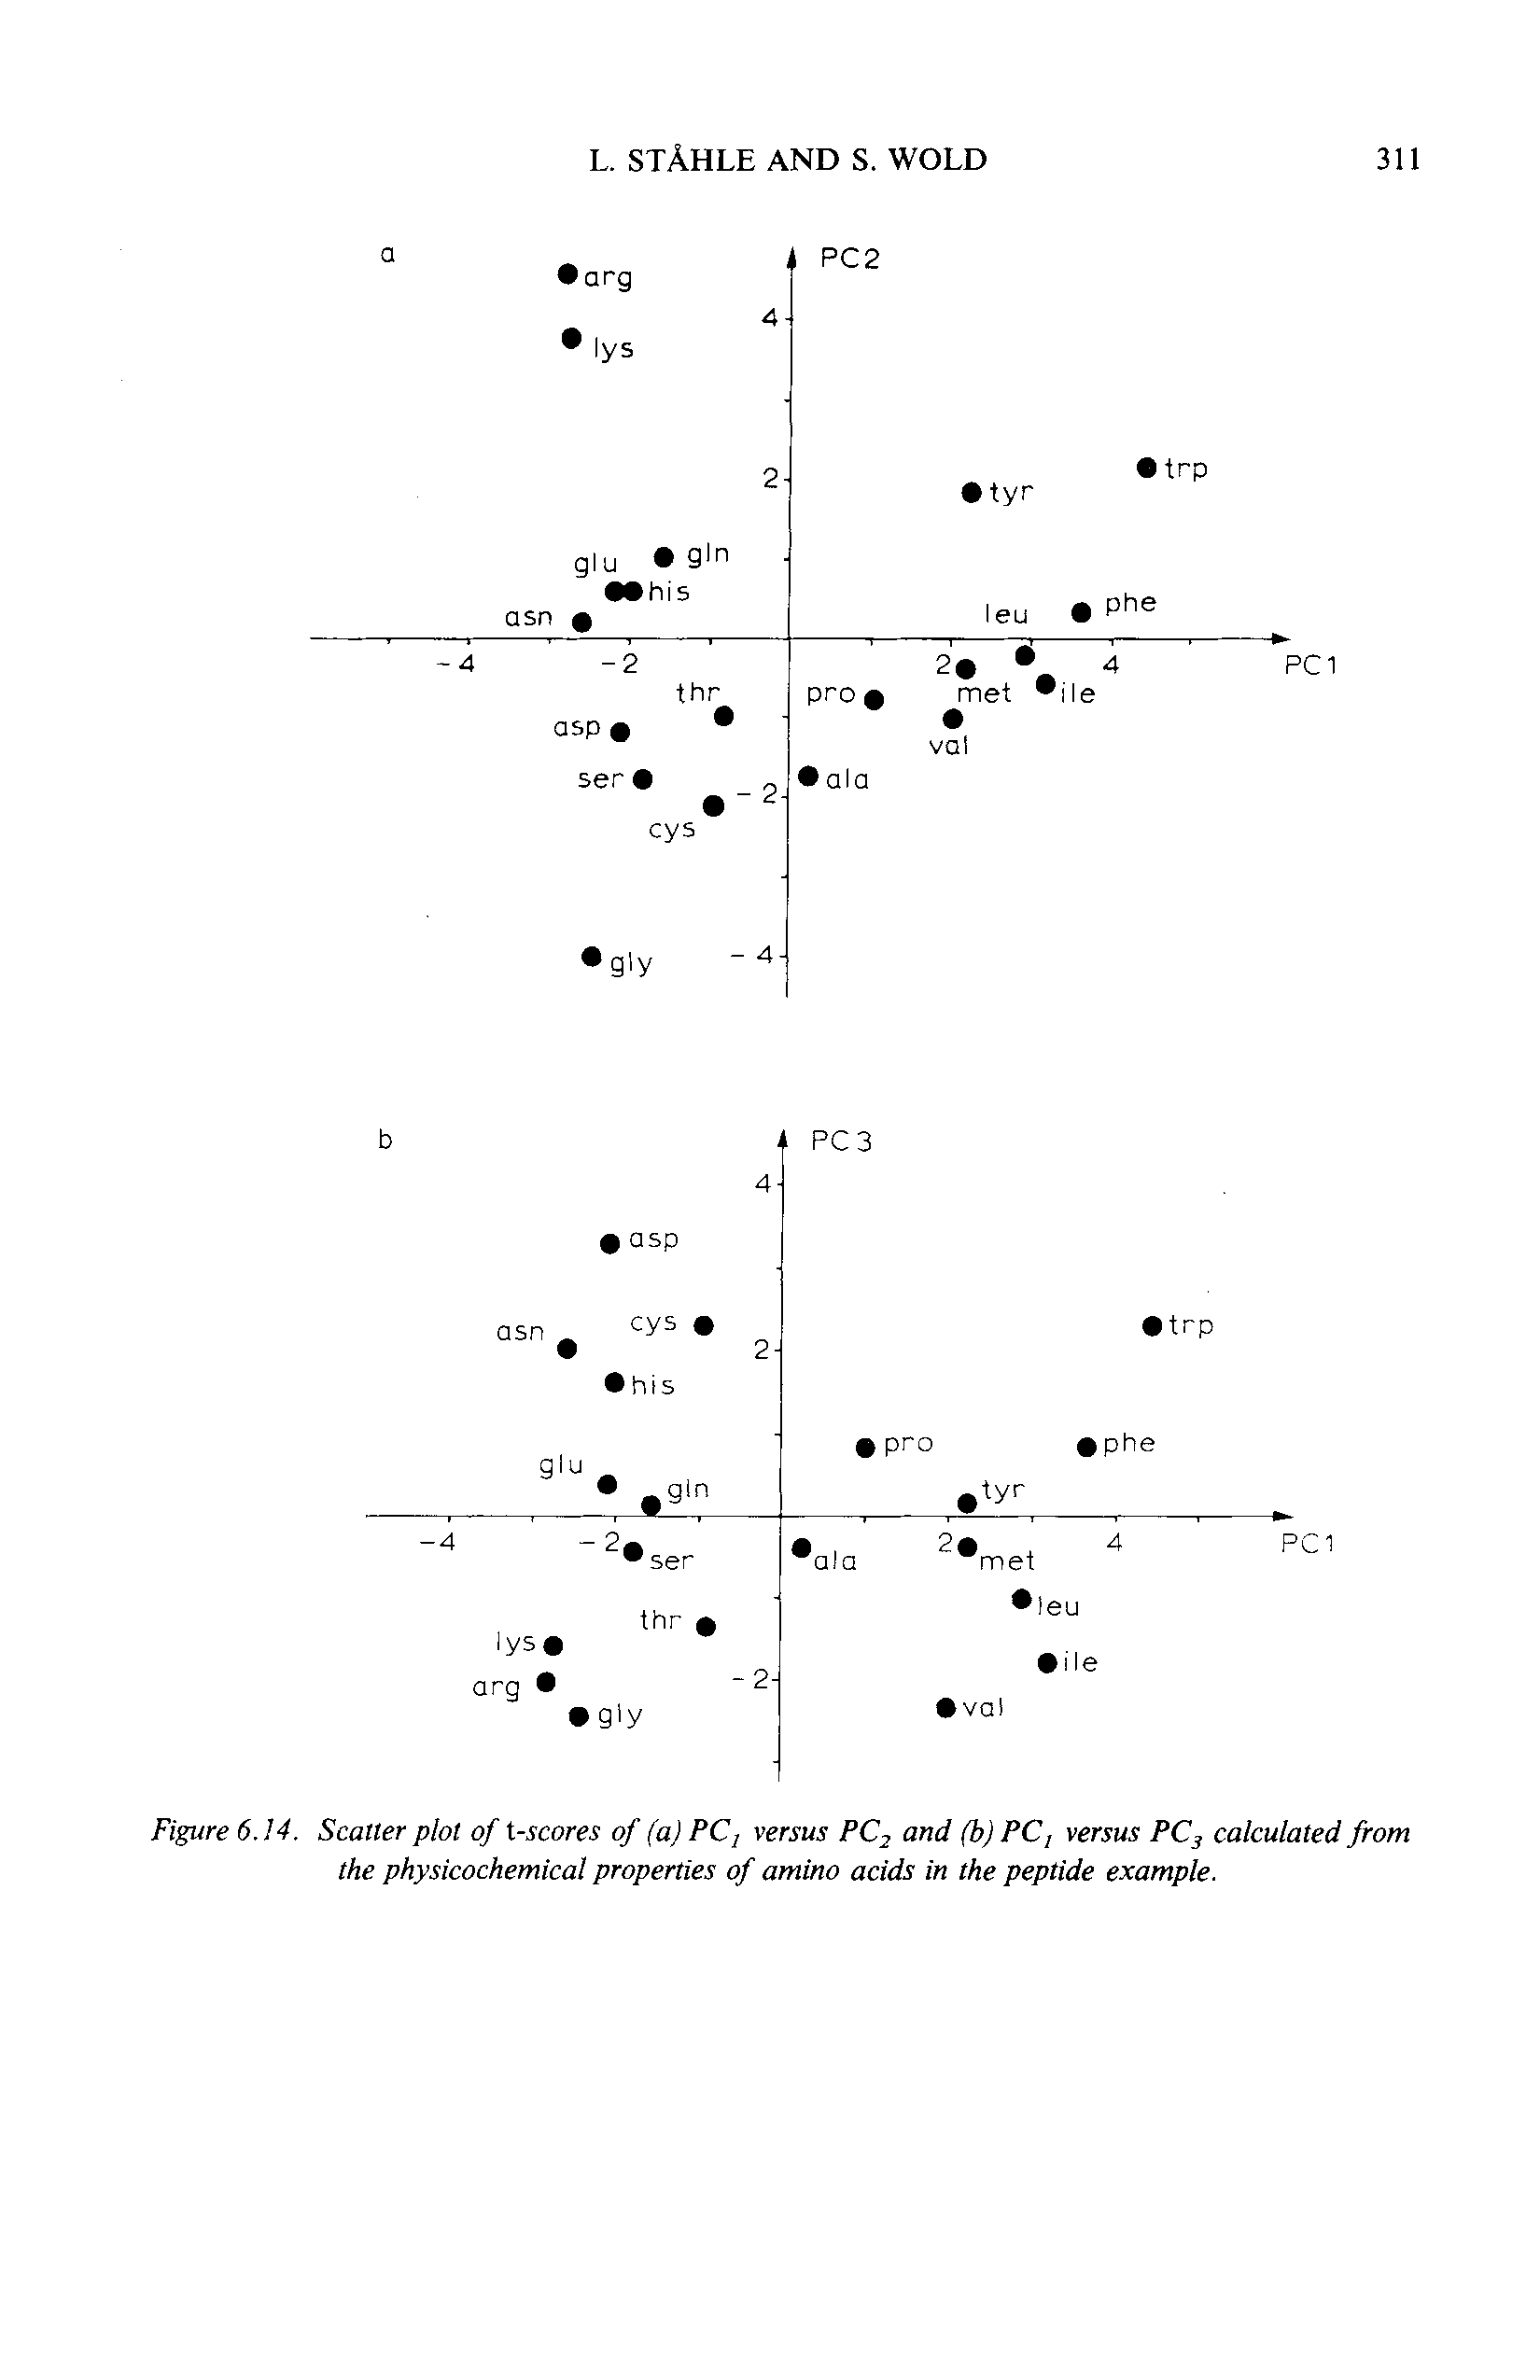 Figure 6.14. Scatter plot of t-scores of (a) PC, versus PC2 and (b) PC, versus PC3 calculated from the physicochemical properties of amino acids in the peptide example.